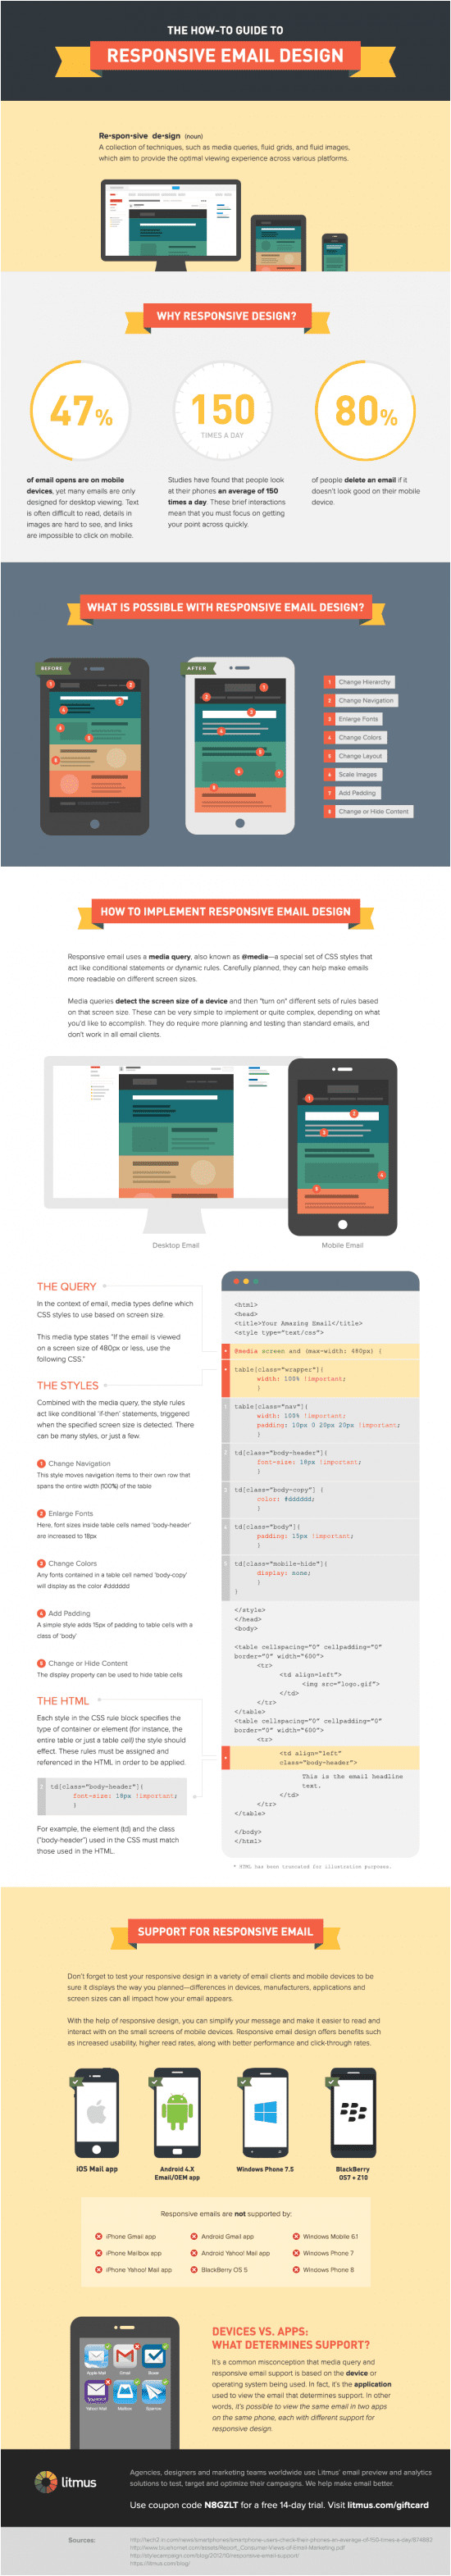 responsive email design infographic